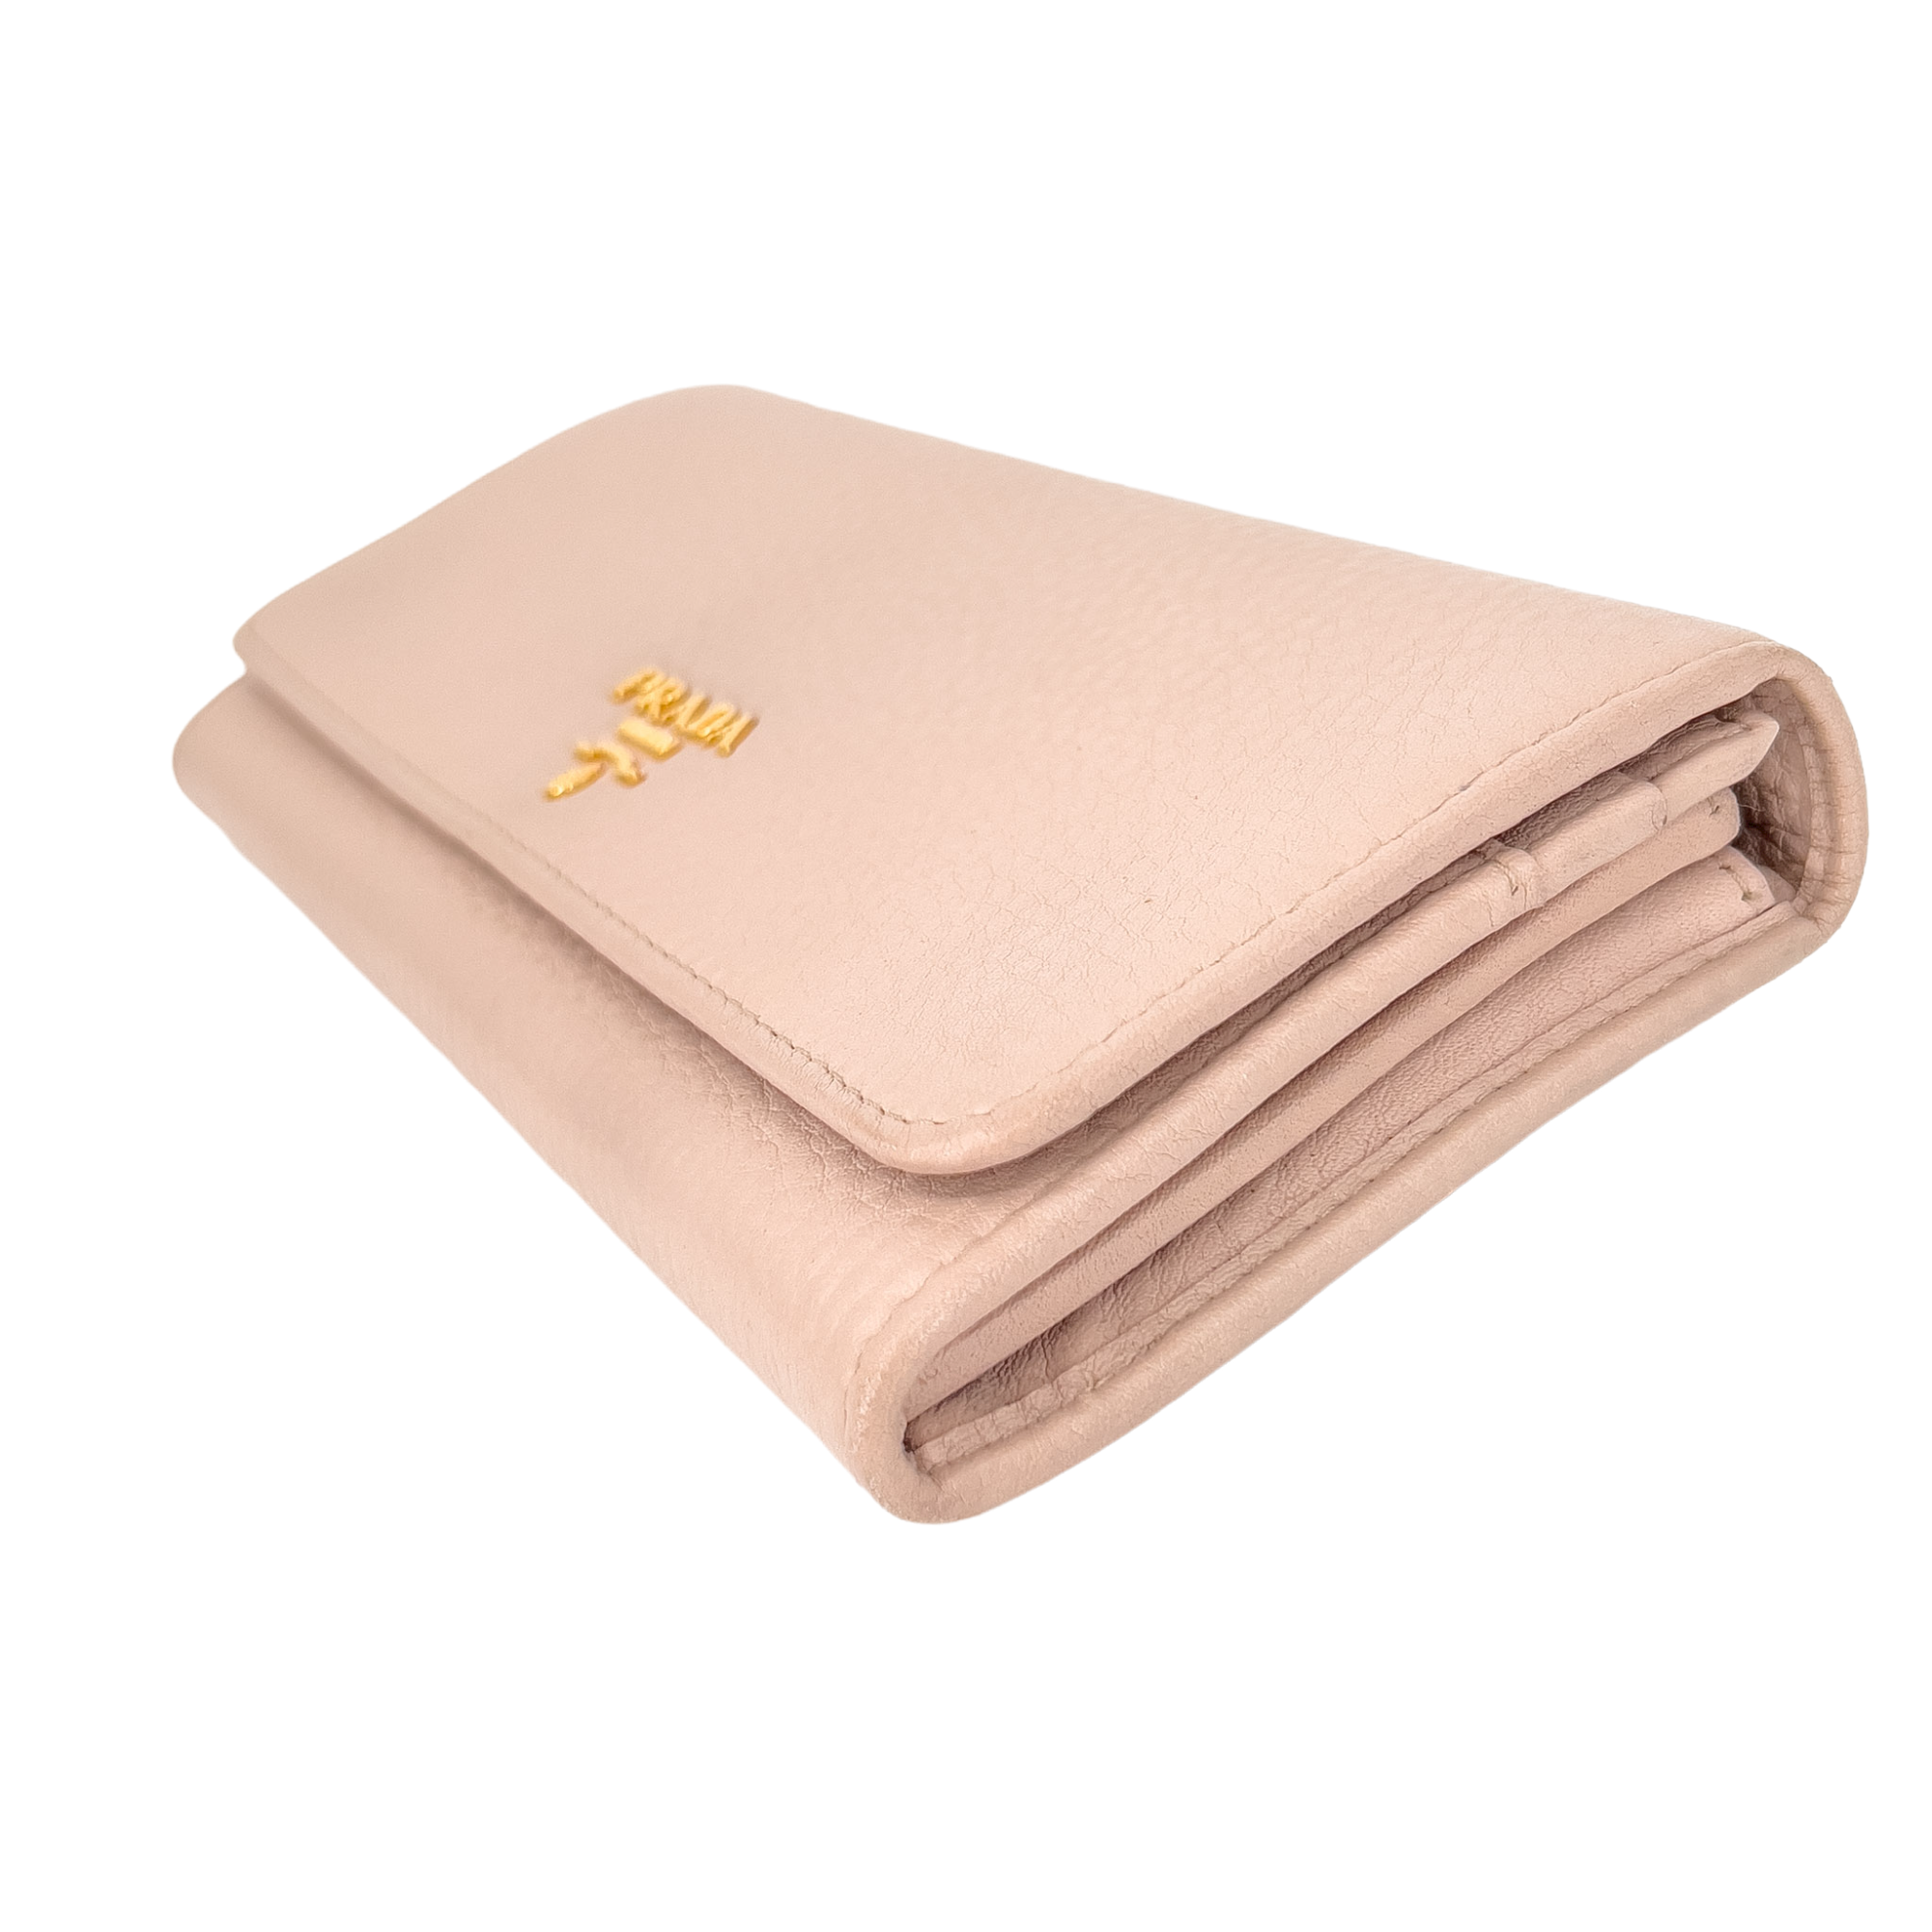 Soft Pink Daino Leather Wallet with Gold Chain